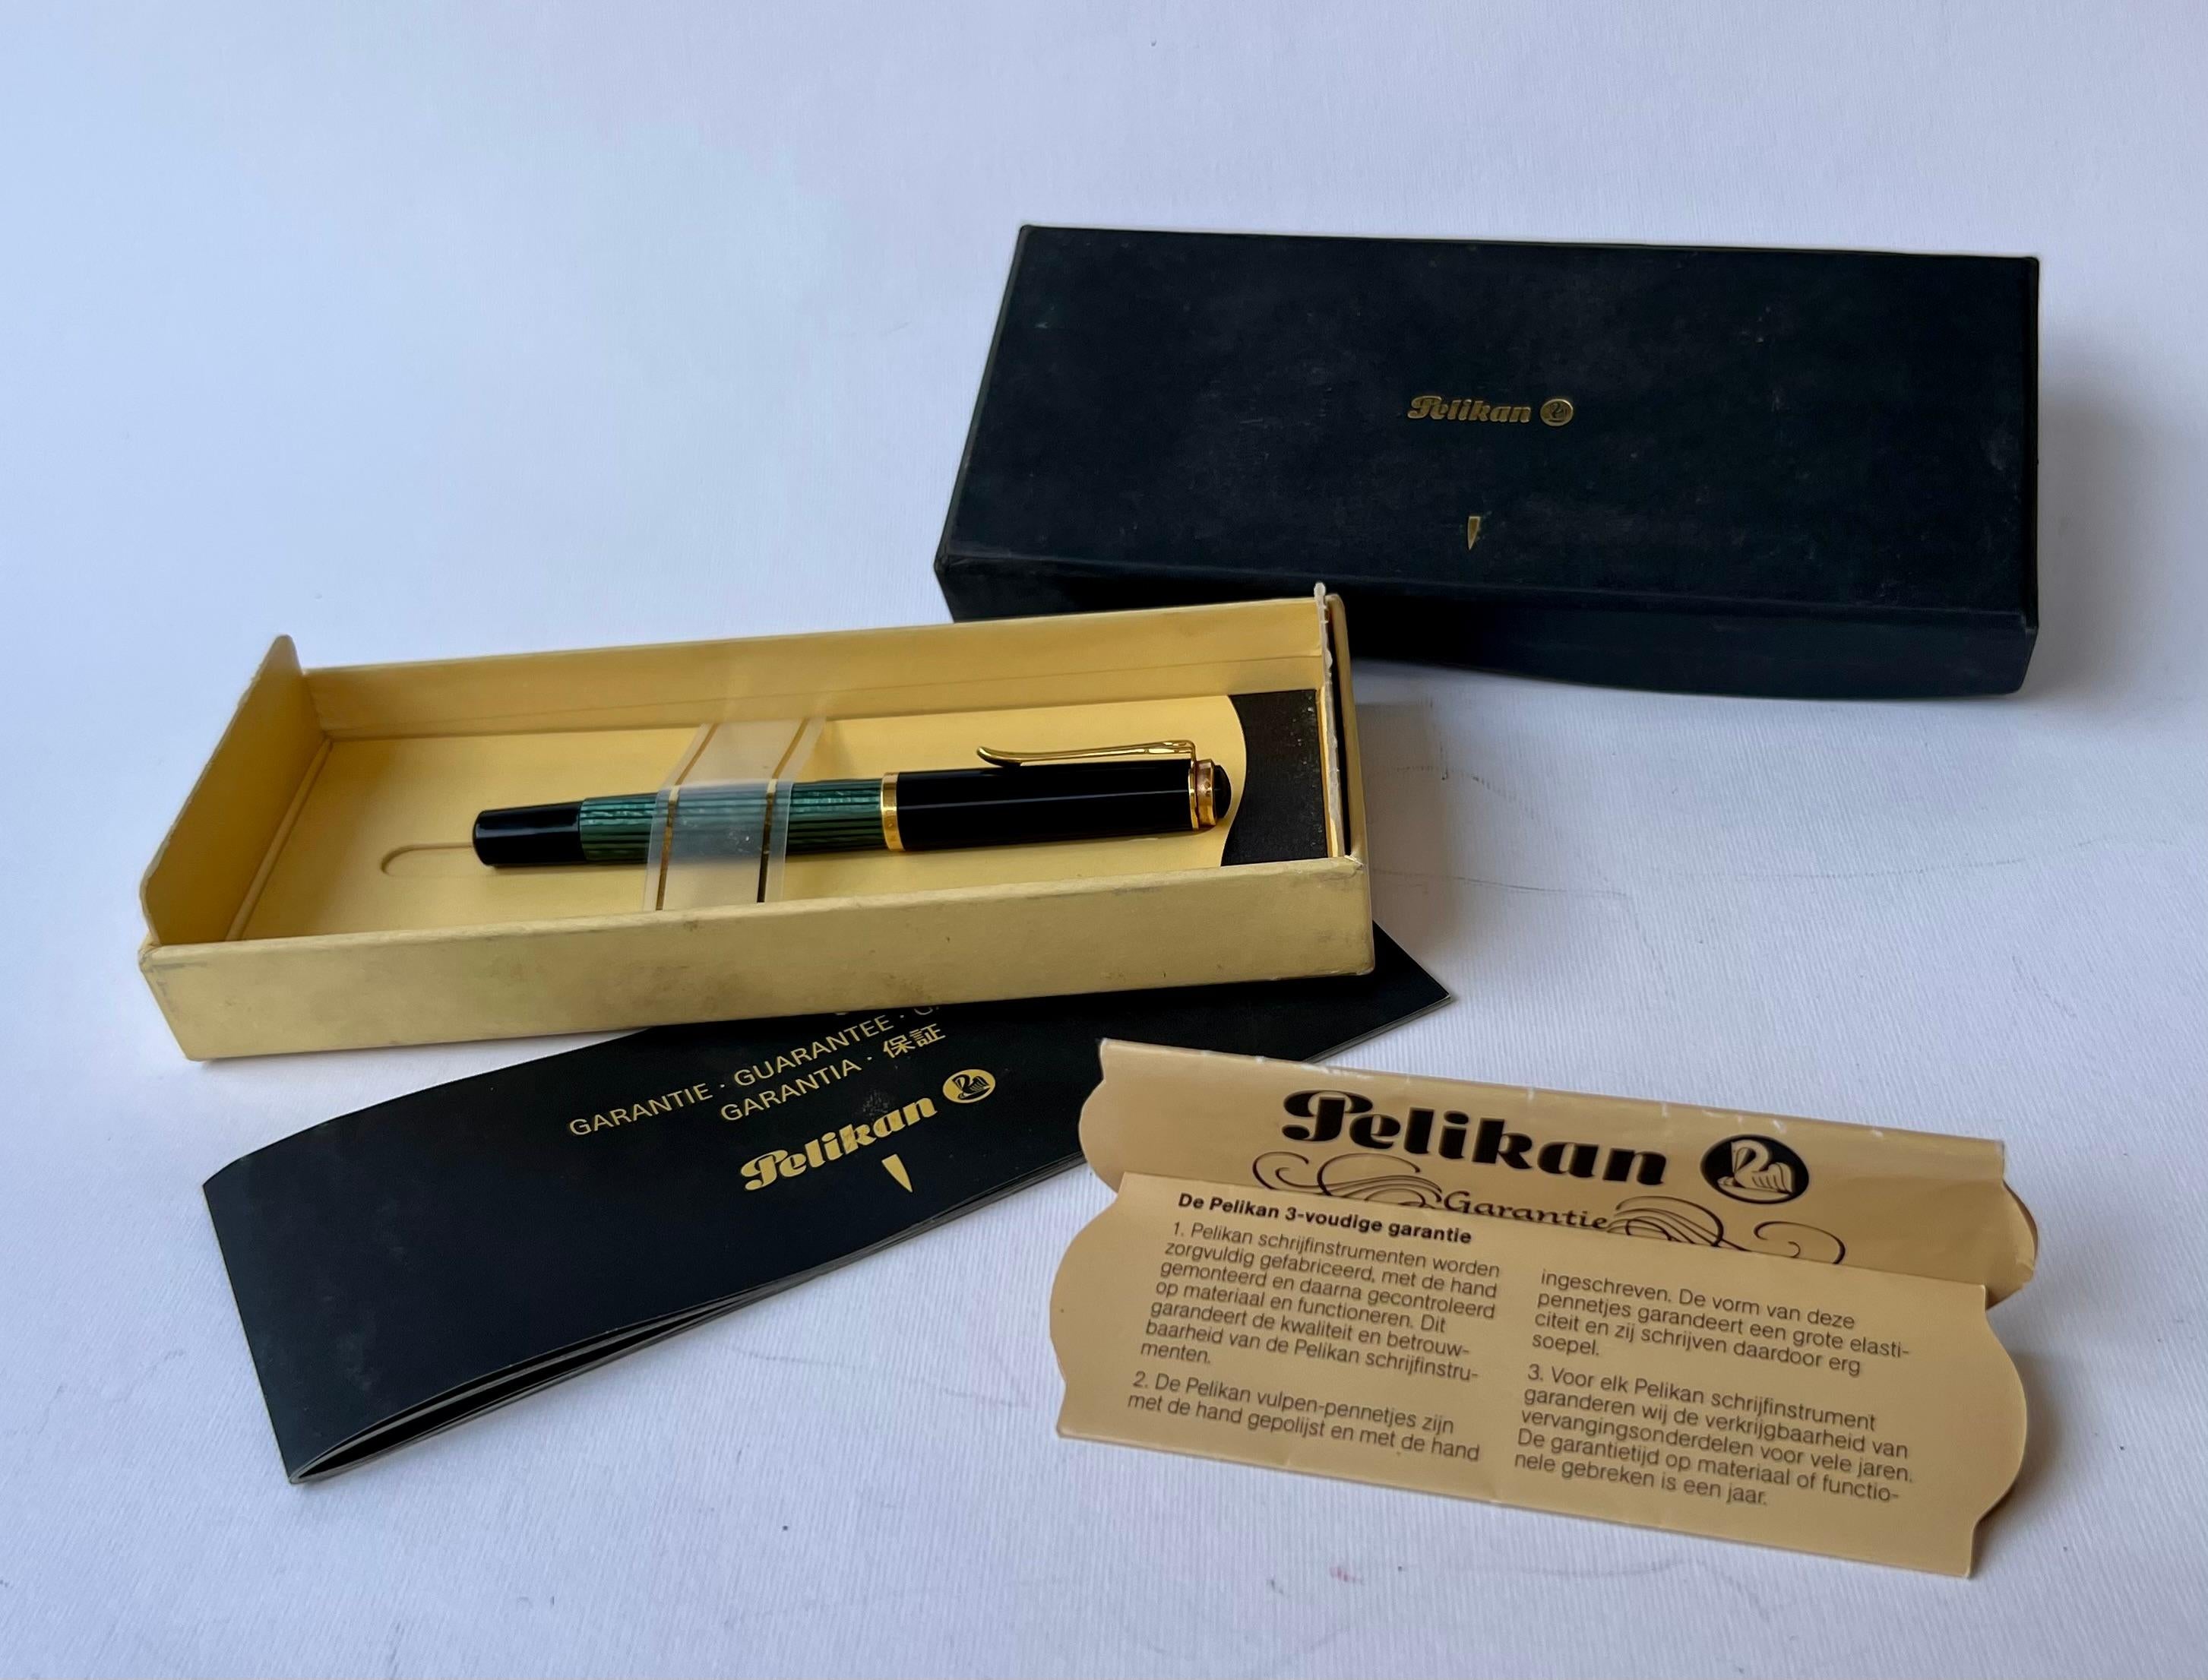 For your consideration a very nice he pen was manufactured in Germany and has a 14K FINE NIB. The M585 is the smallest and lightest of Pelikan's flagship Souveran line, which makes it great for someone with smaller hands. The pen has a piston